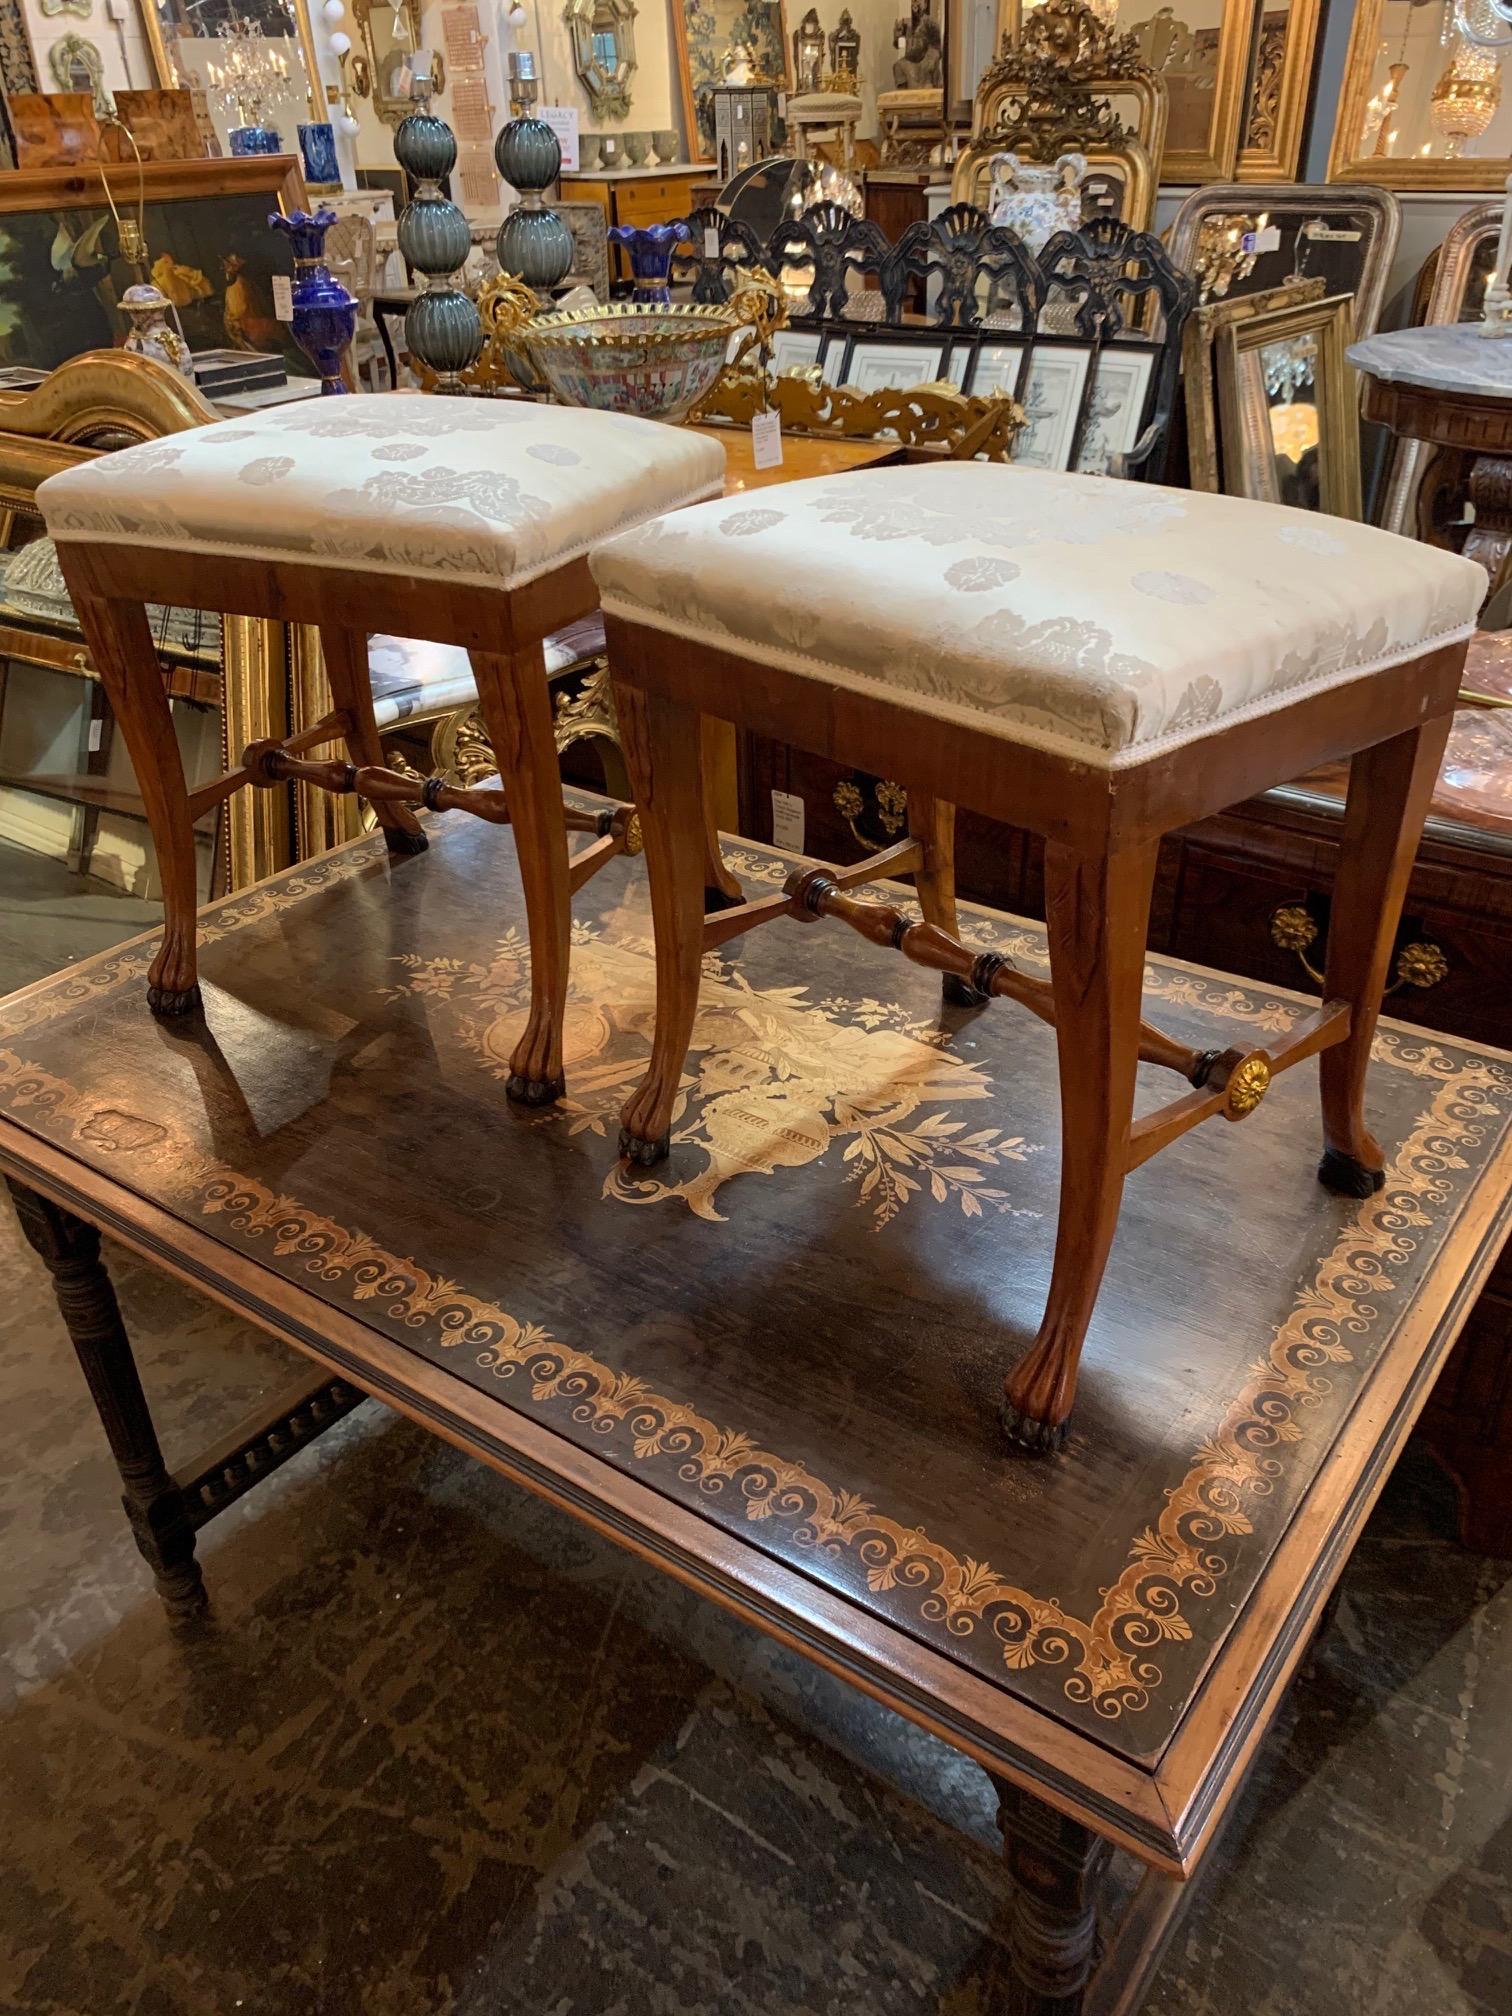 Handsome pair of 19th century Austrian Biedermeier fruitwood stools. These have gilt and ebony accents along with gorgeous silk upholstery. Super elegant!